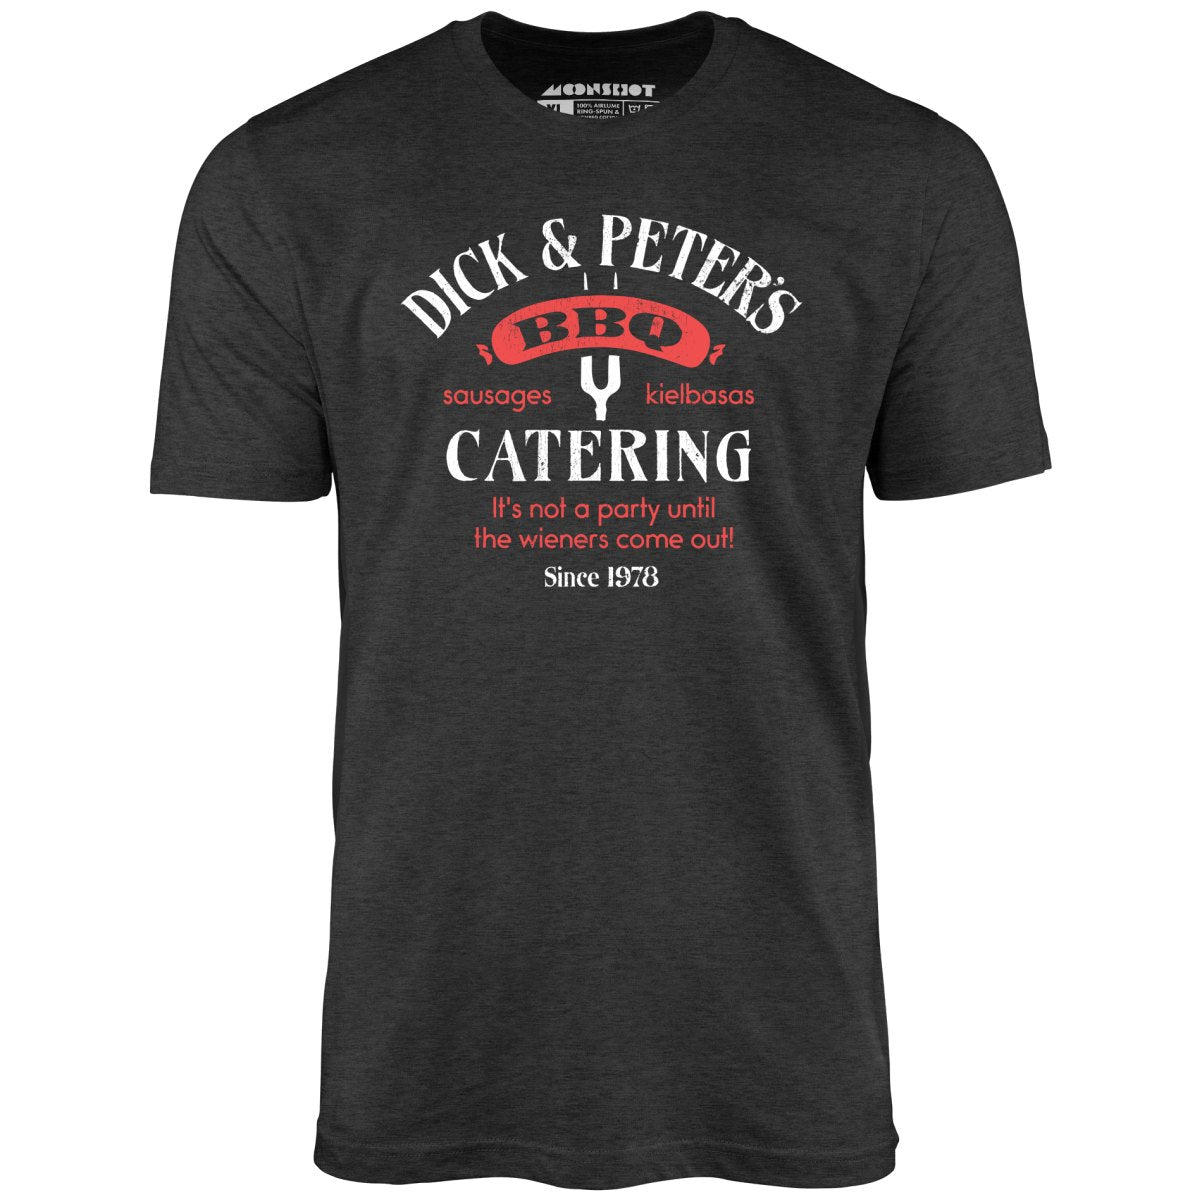 Dick & Peter's BBQ Catering - Unisex T-Shirt